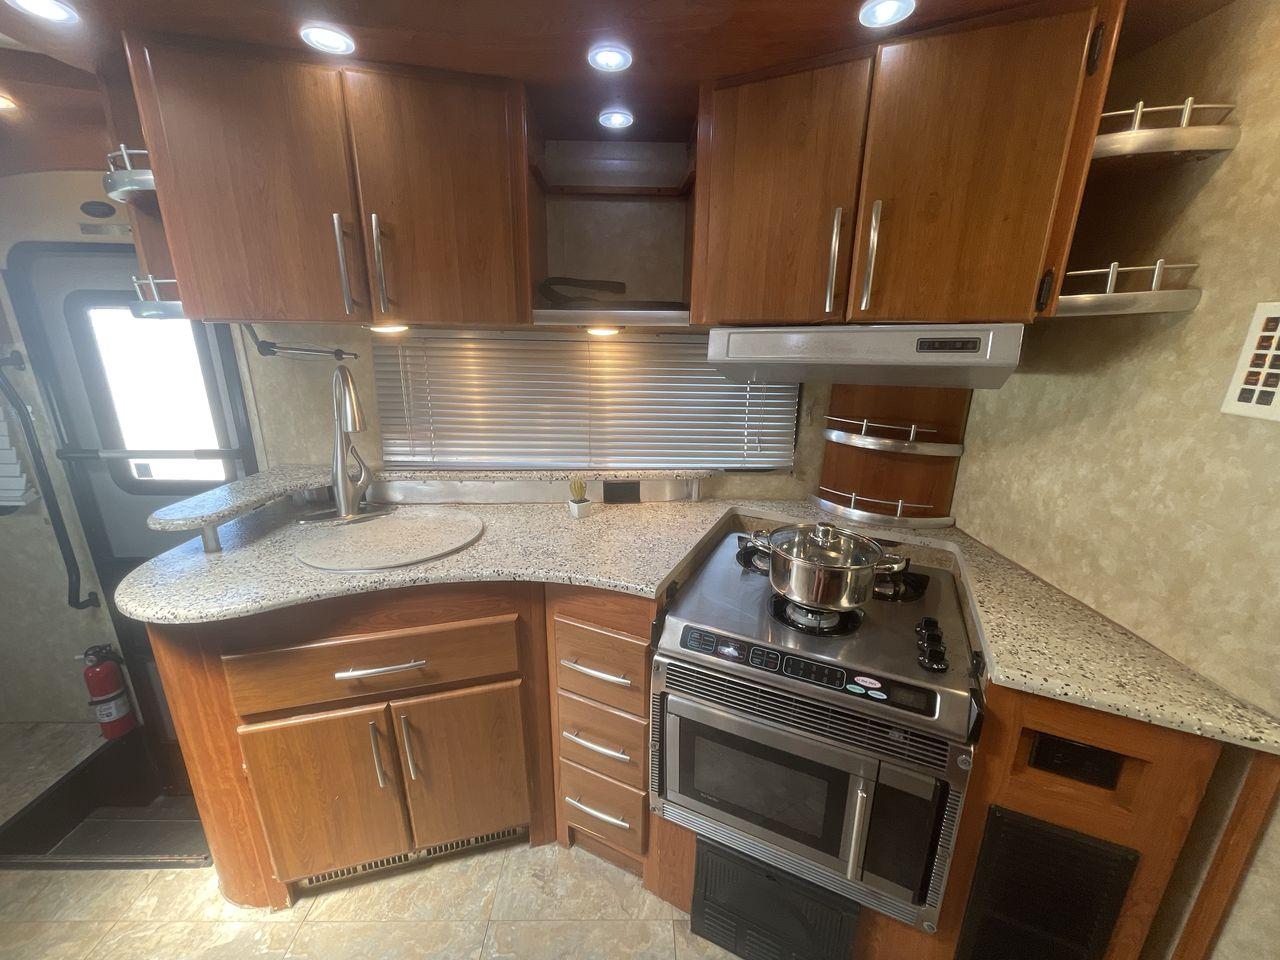 2008 TAN COACHMEN LEPRECHAUN 320DS E-450 (1FDXE45S08D) with an 6.8L V10 SOHC 20V engine, Length: 31.5 ft. | Dry Weight: 12,555 lbs. | Gross Weight: 14,500 lbs. | Slides: 2 transmission, located at 4319 N Main Street, Cleburne, TX, 76033, (817) 221-0660, 32.435829, -97.384178 - Photo #10